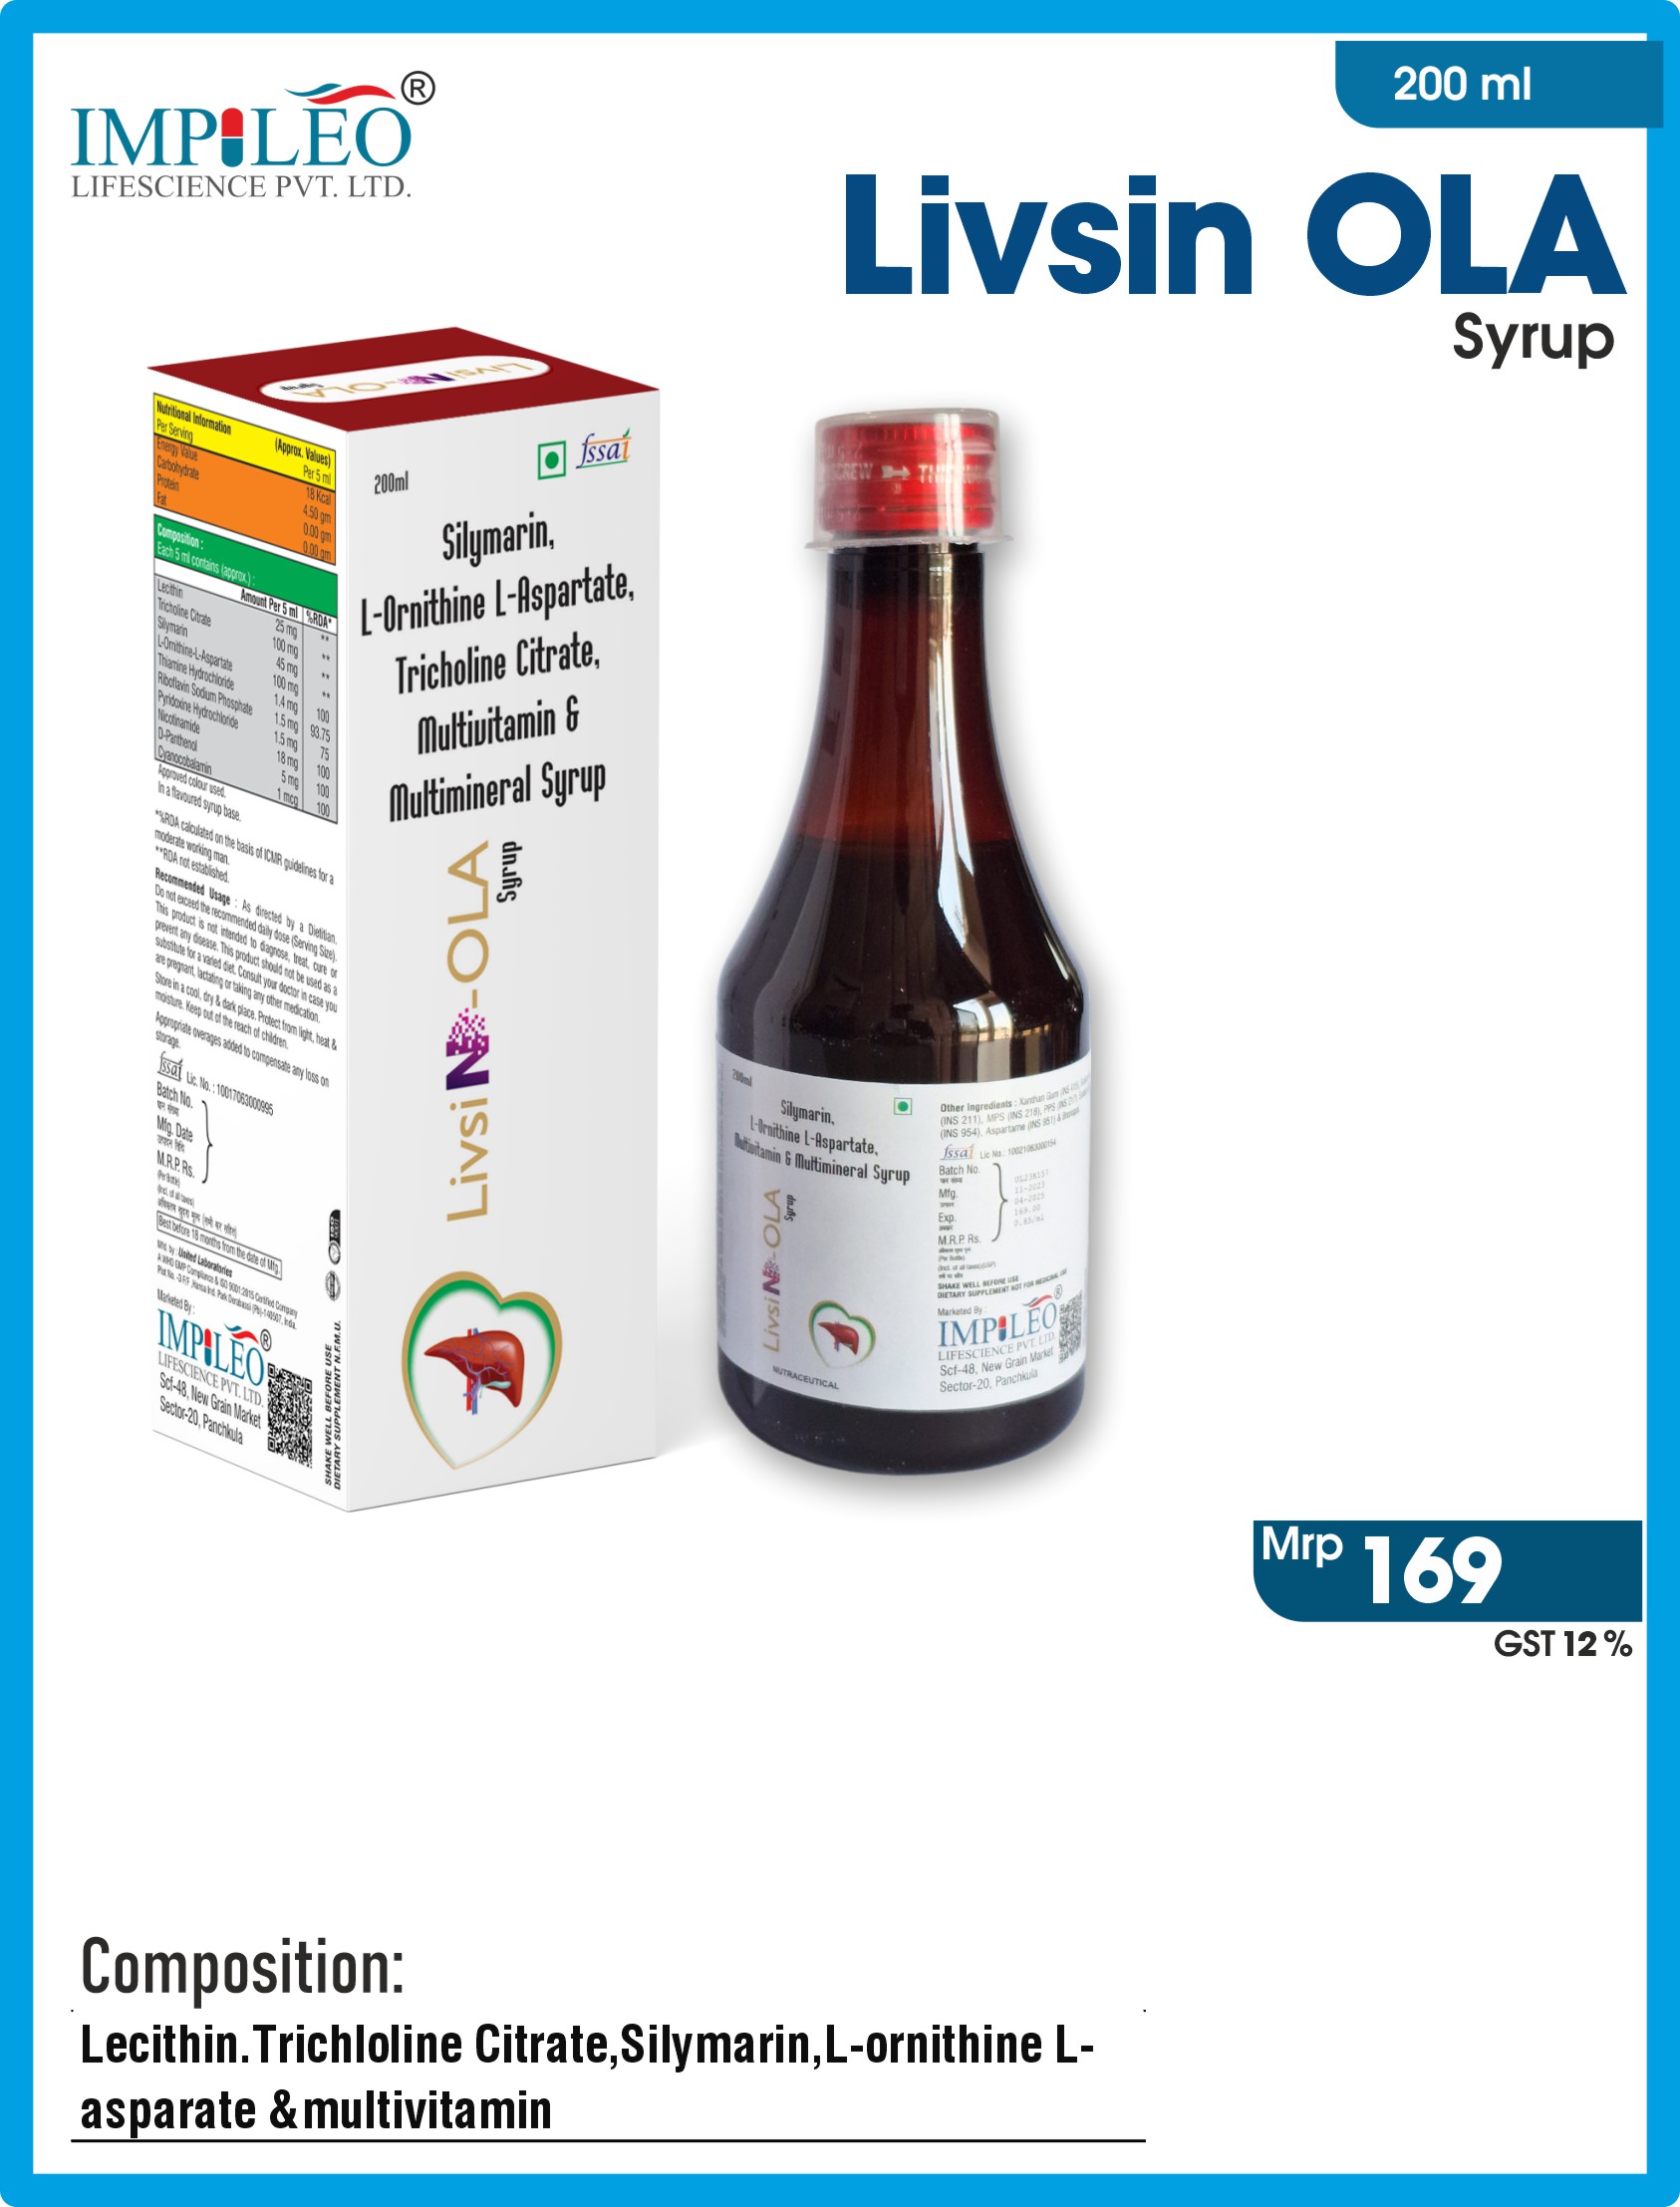  LIVSIN OLA SYRUP : Empowering Liver Health with Premier PCD Pharma Franchise in India